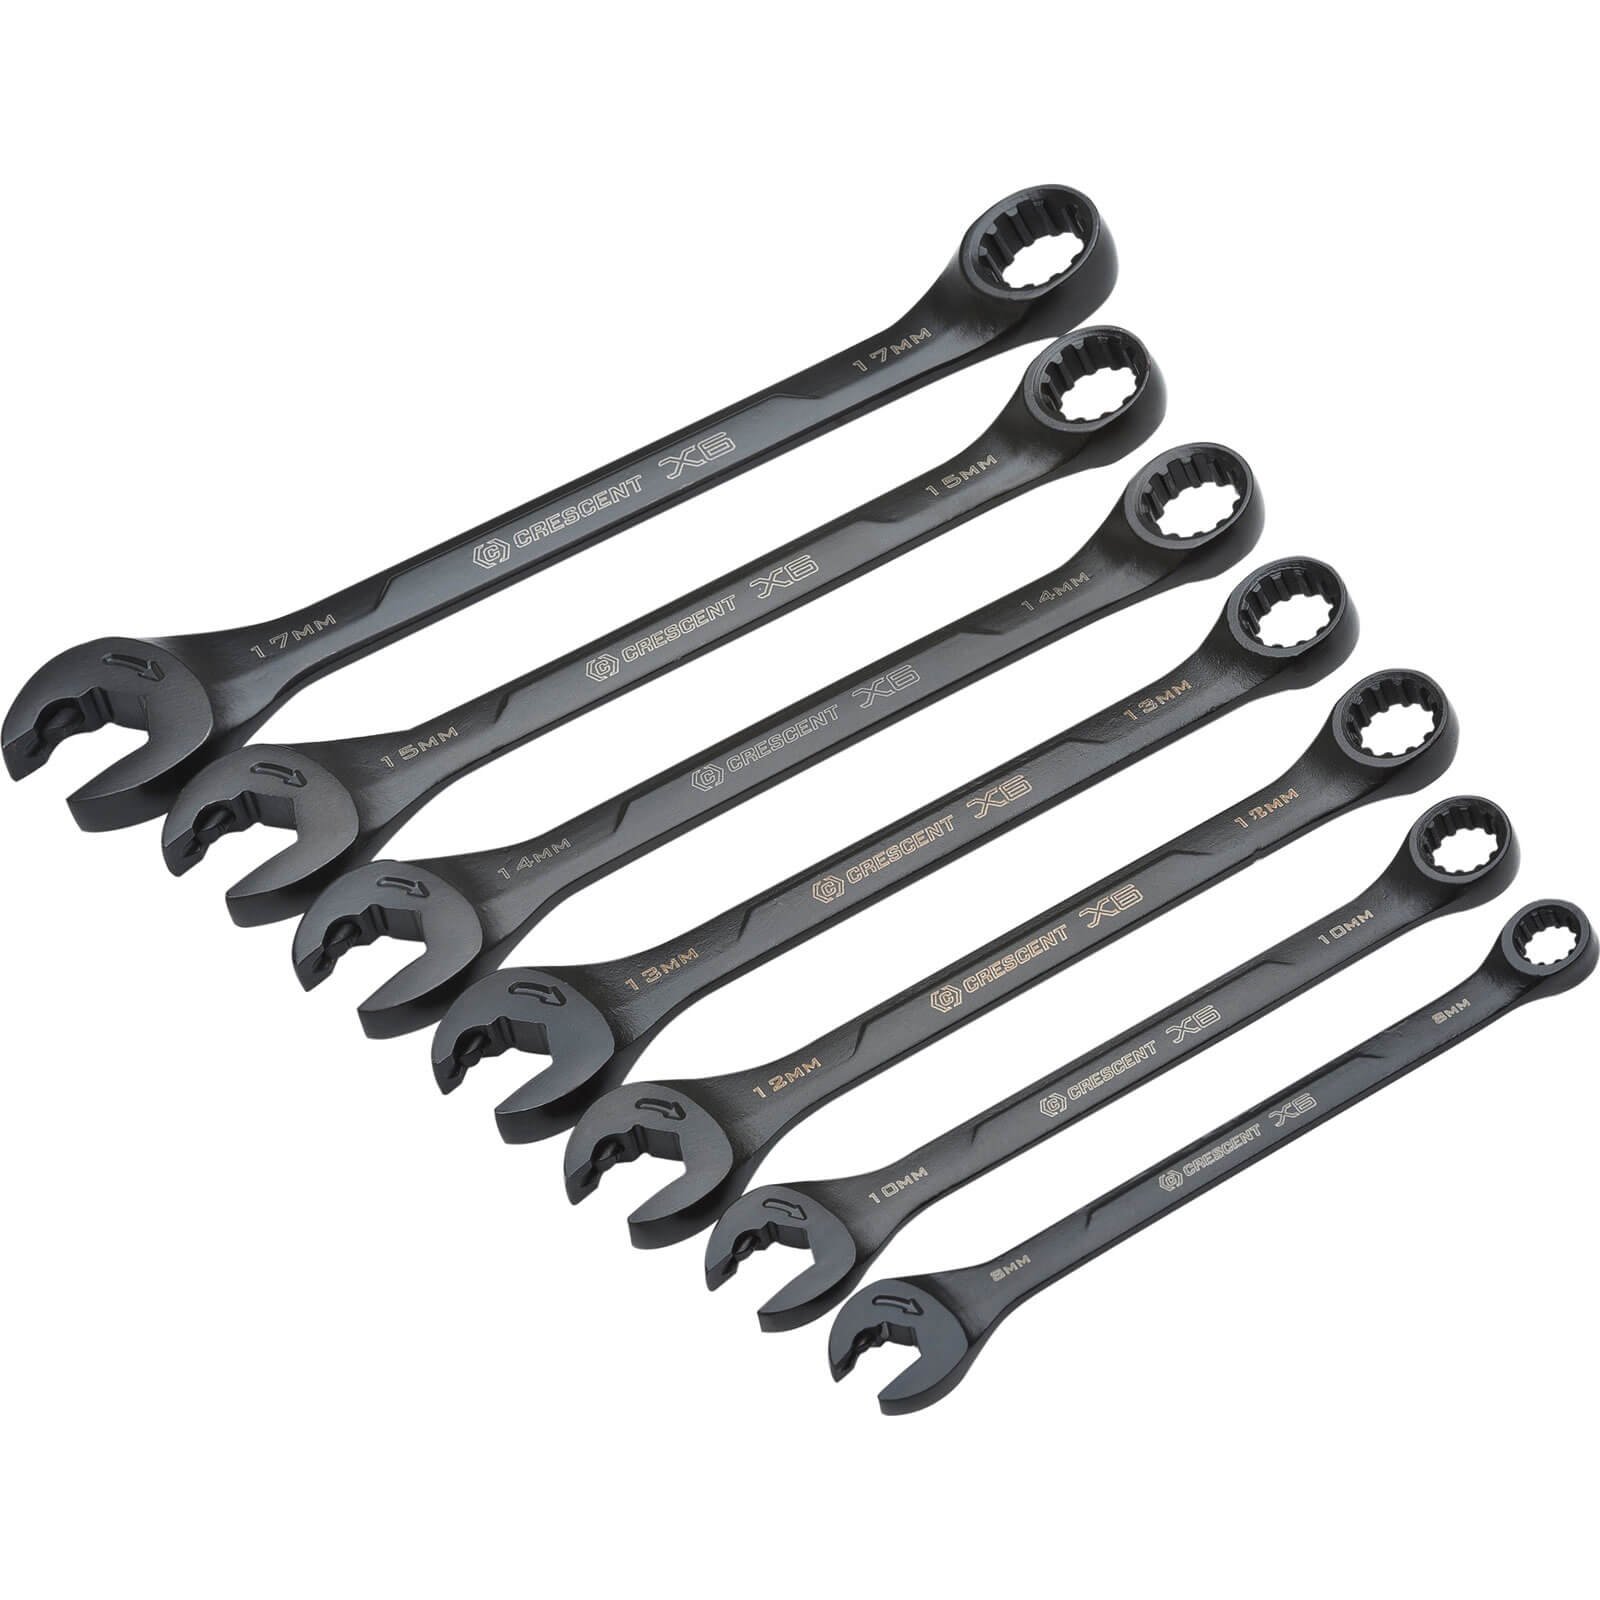 Crescent 7 Piece X6 Open End Ratcheting Wrench Set